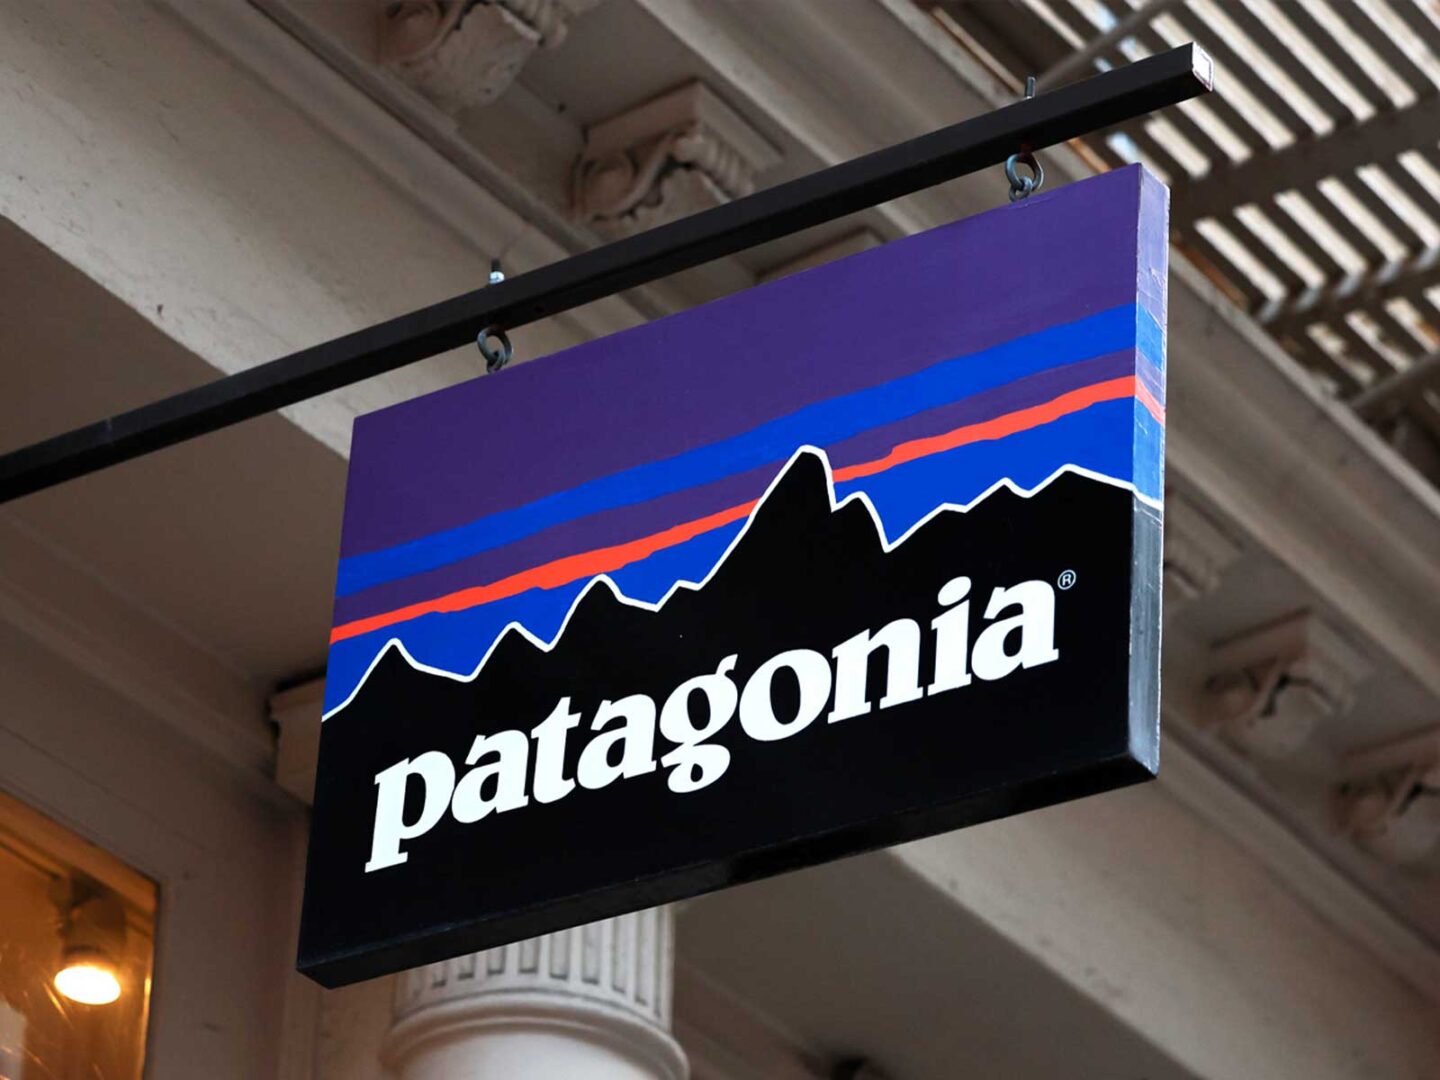 Patagonia settles with GAP after accusations of plagiarism